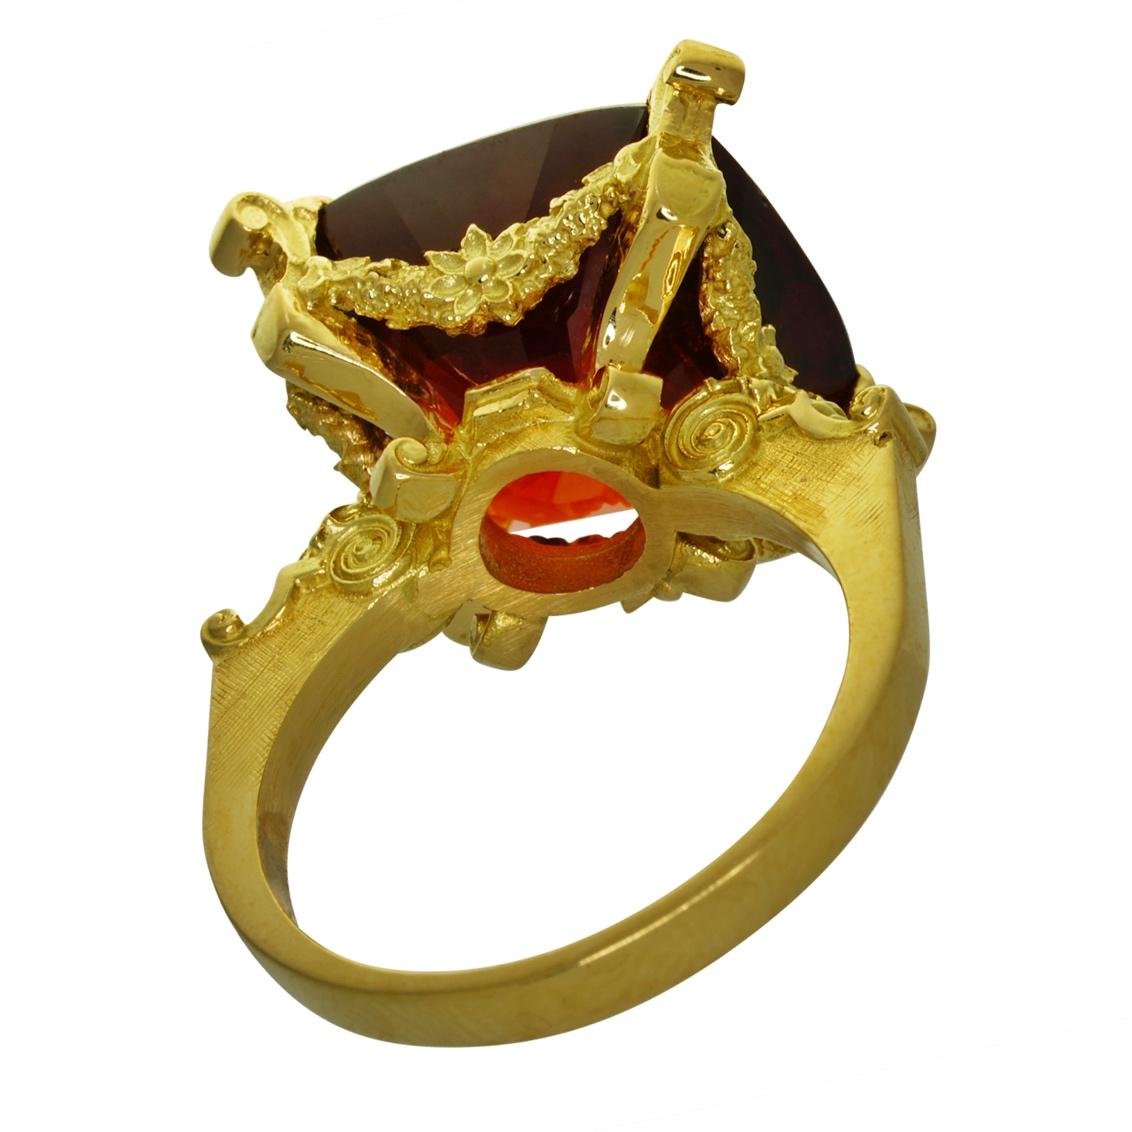 Dionysus and the Nymphs of Nysa Ring in 18kt Gold, Cushion Cut 20.98ct Garnet For Sale 5